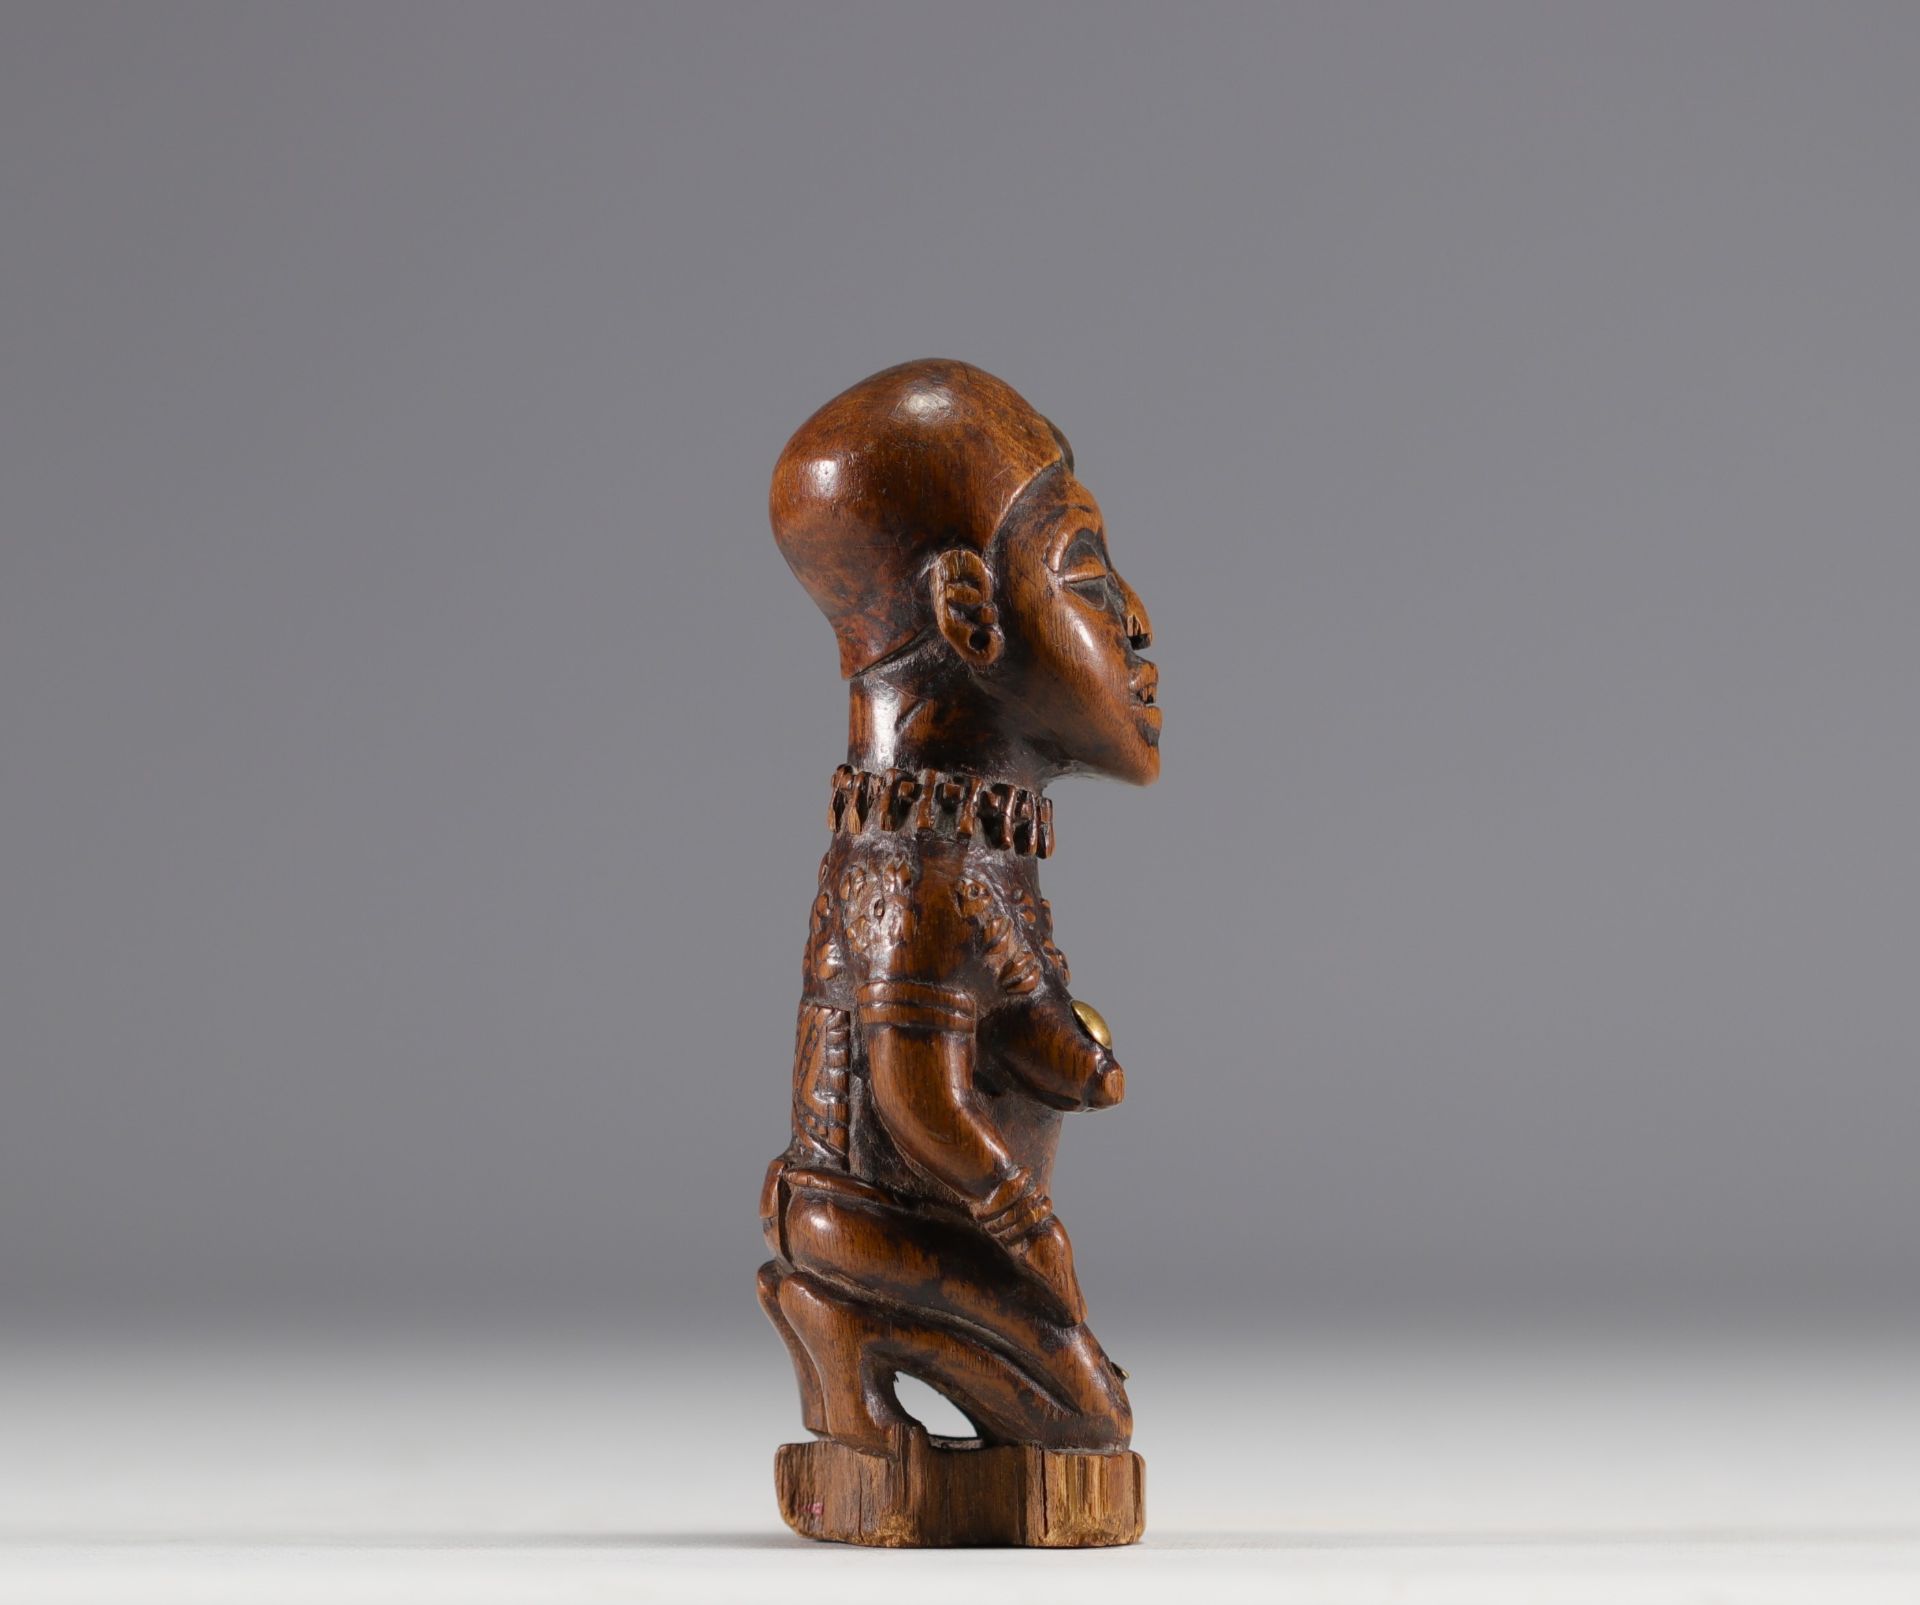 Rare Bas-Congo statuette in carved wood with scarification marks and nails from the 1900s - Image 3 of 6